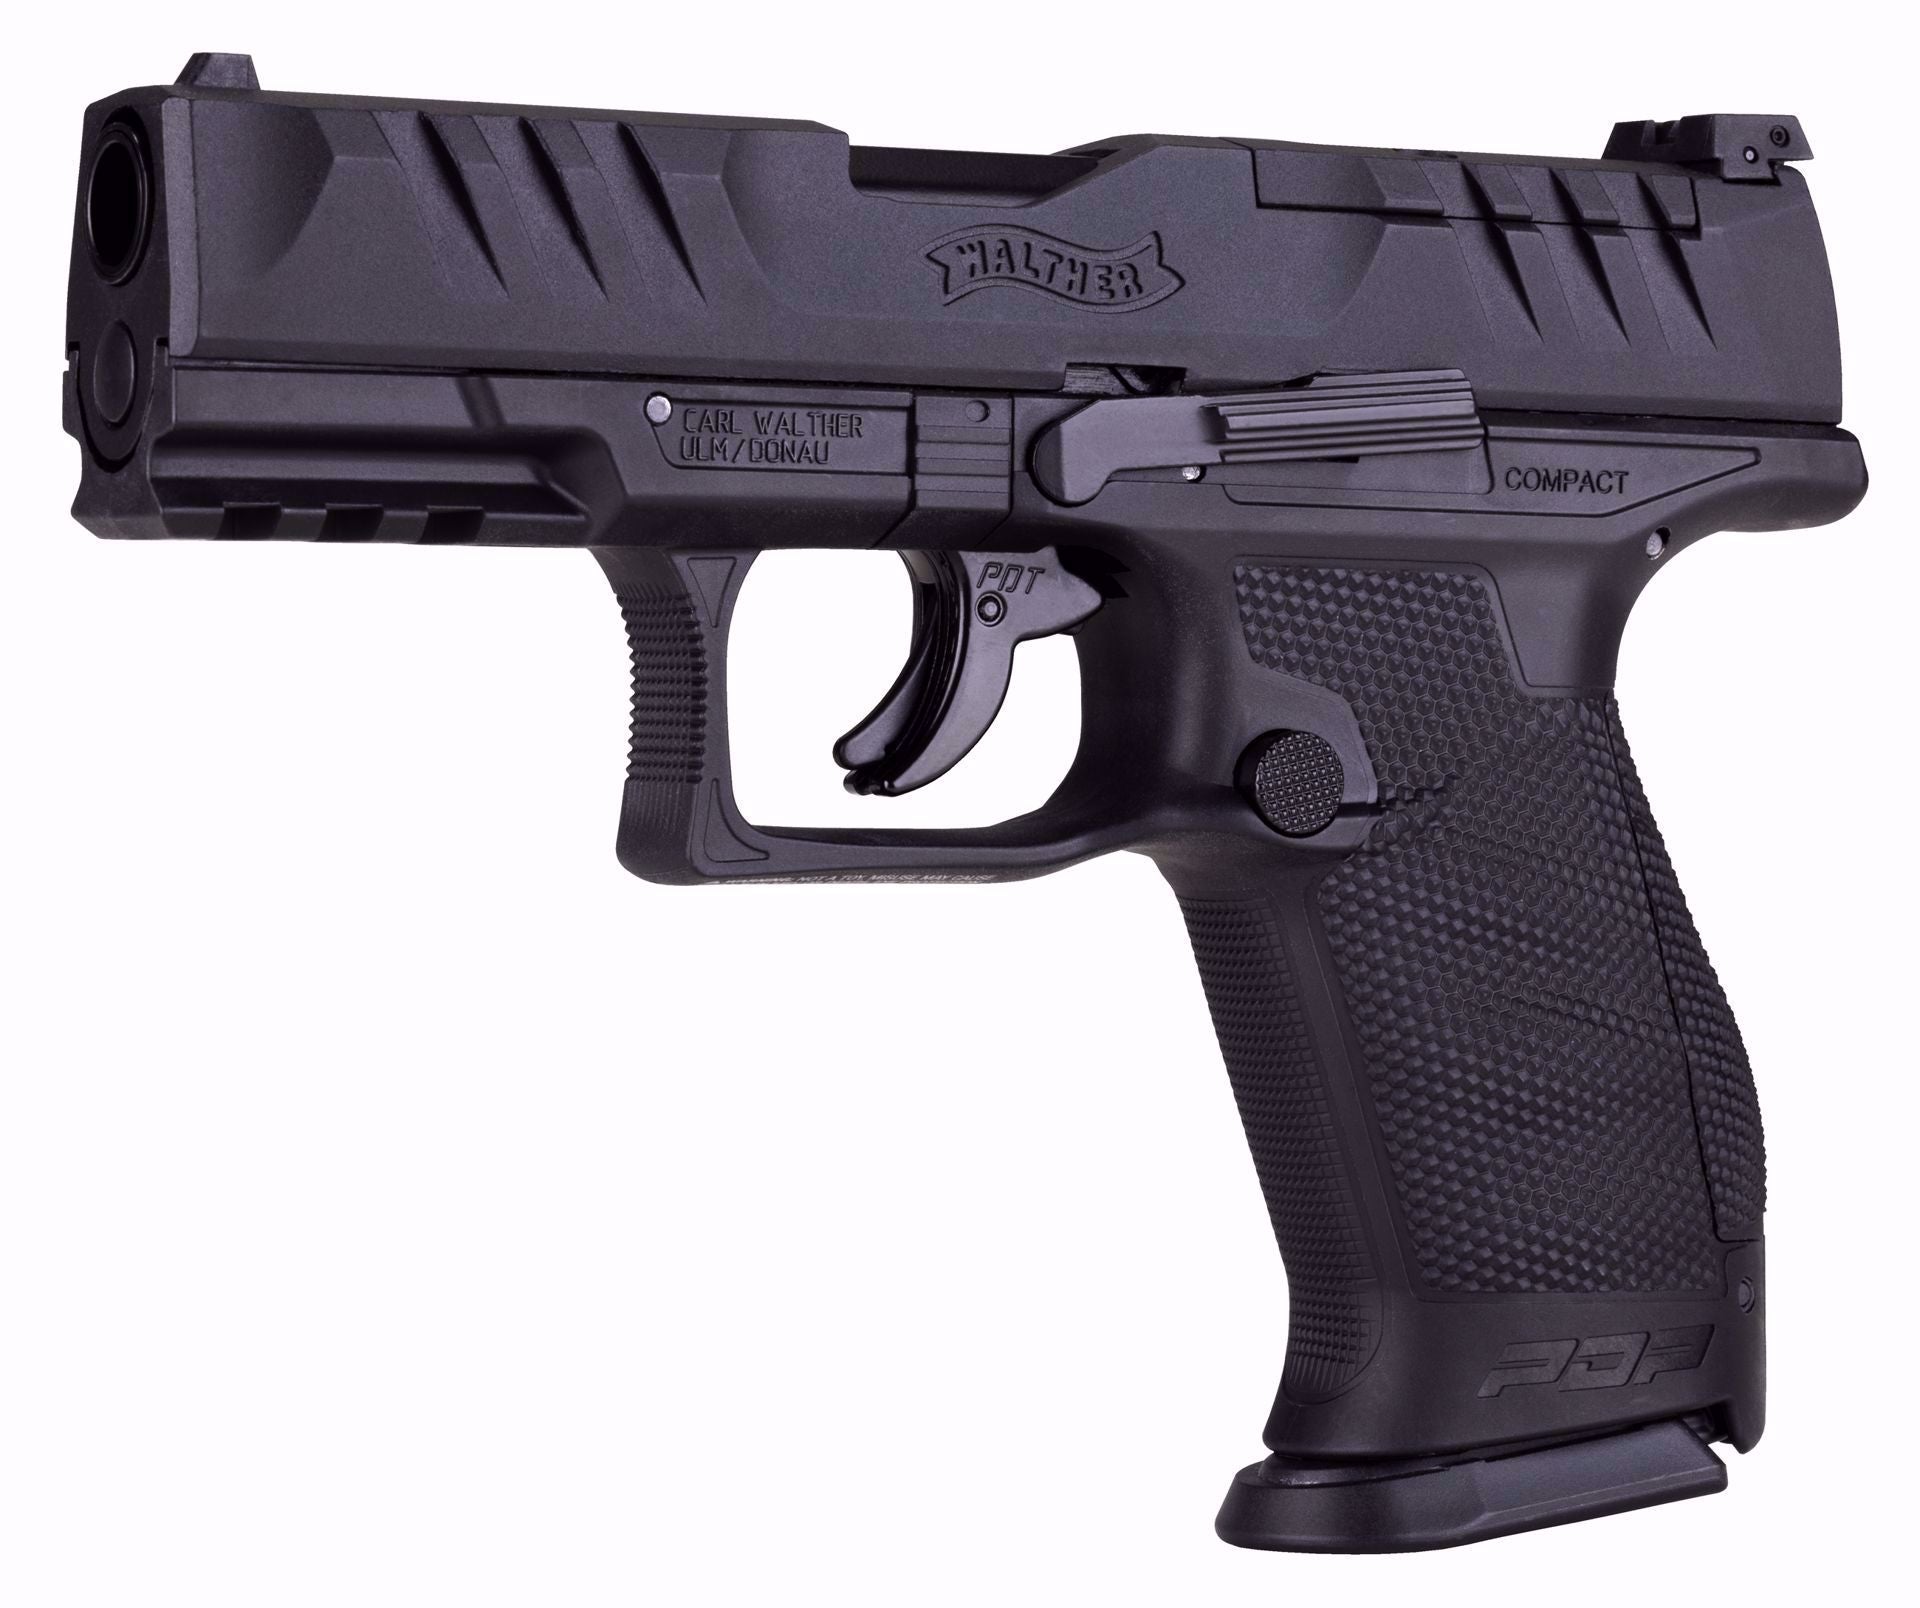 0007549_t4e-walther-pdp-compact-4-optics-ready-paintball-marker-43-cal-black.jpg